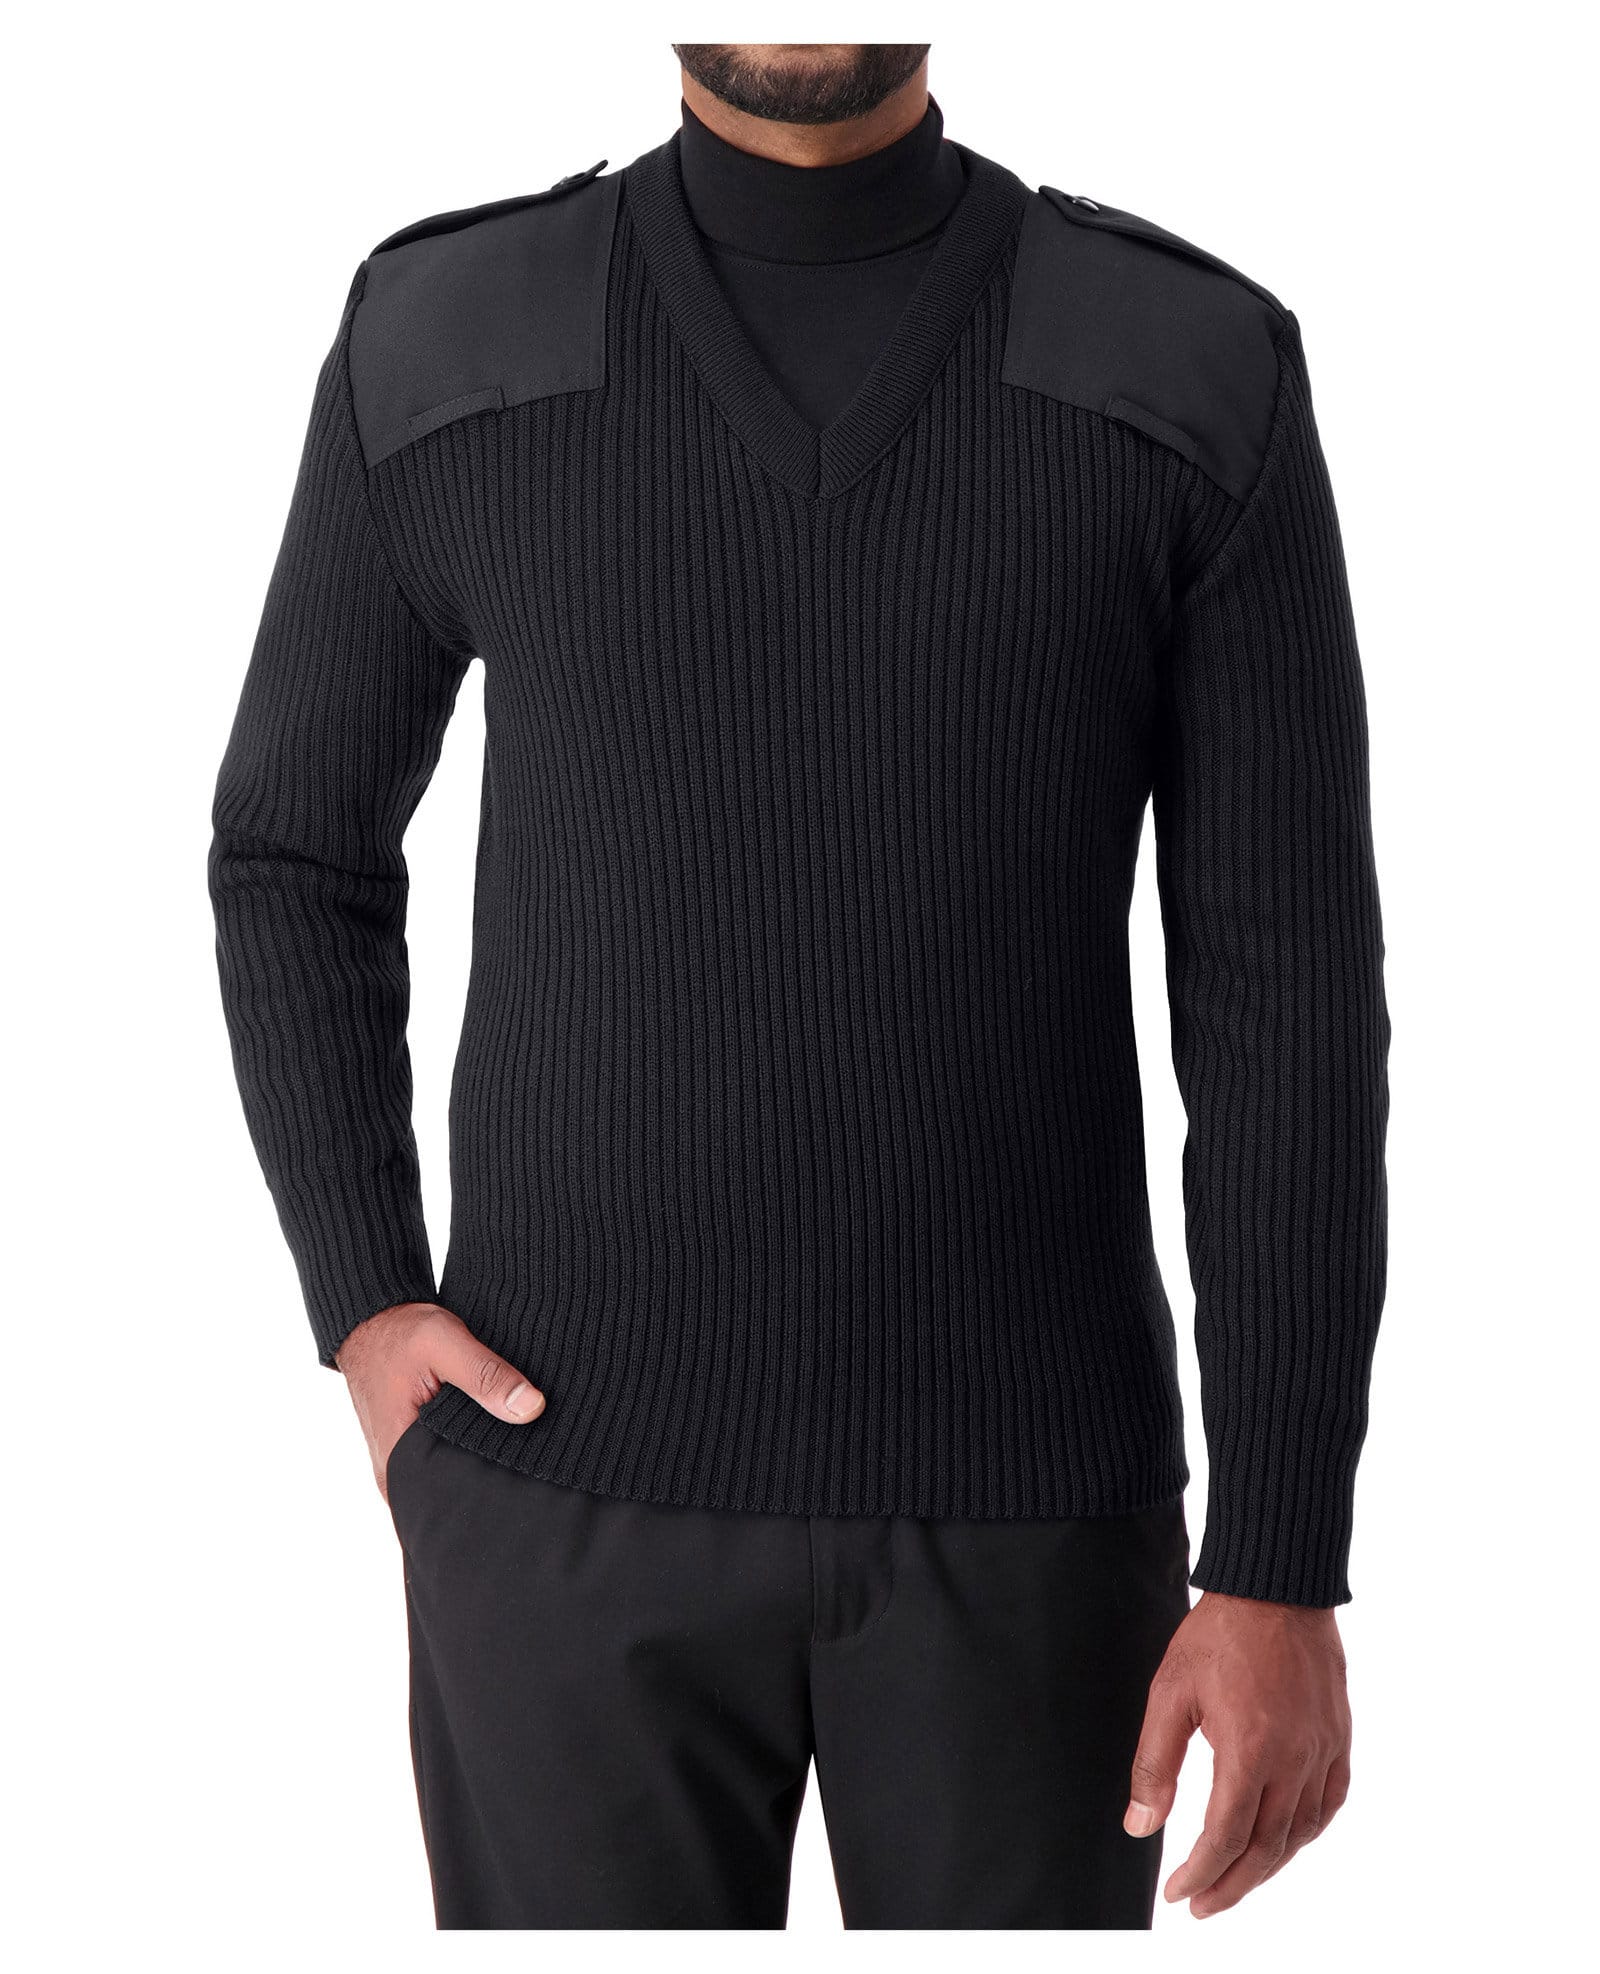 thick black v-neck knit sweater with shoulder and elbow patches 